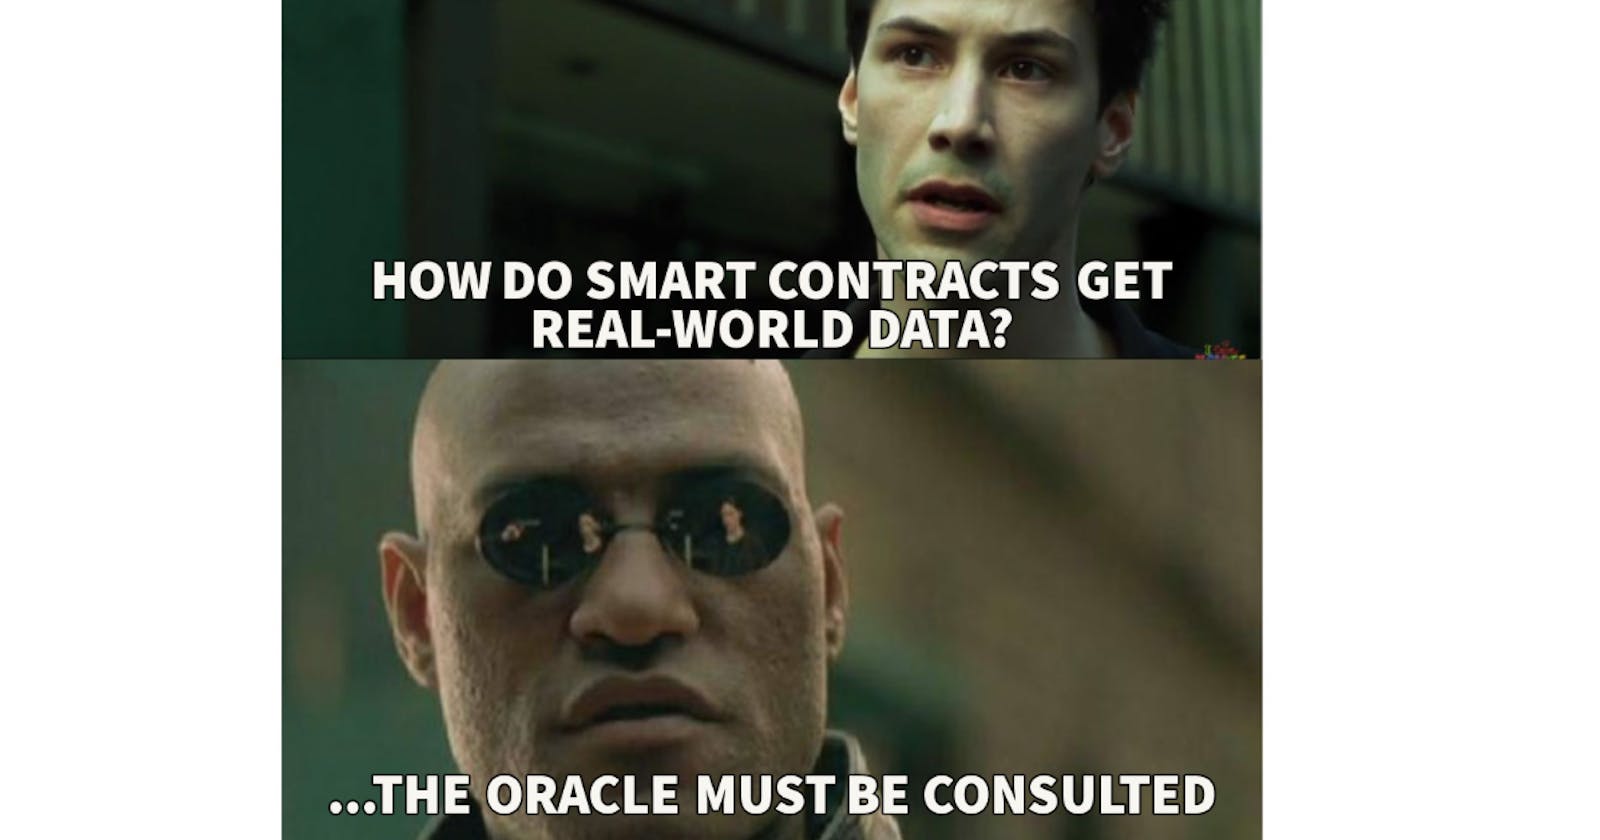 How do Smart Contracts Get Real-World Data?